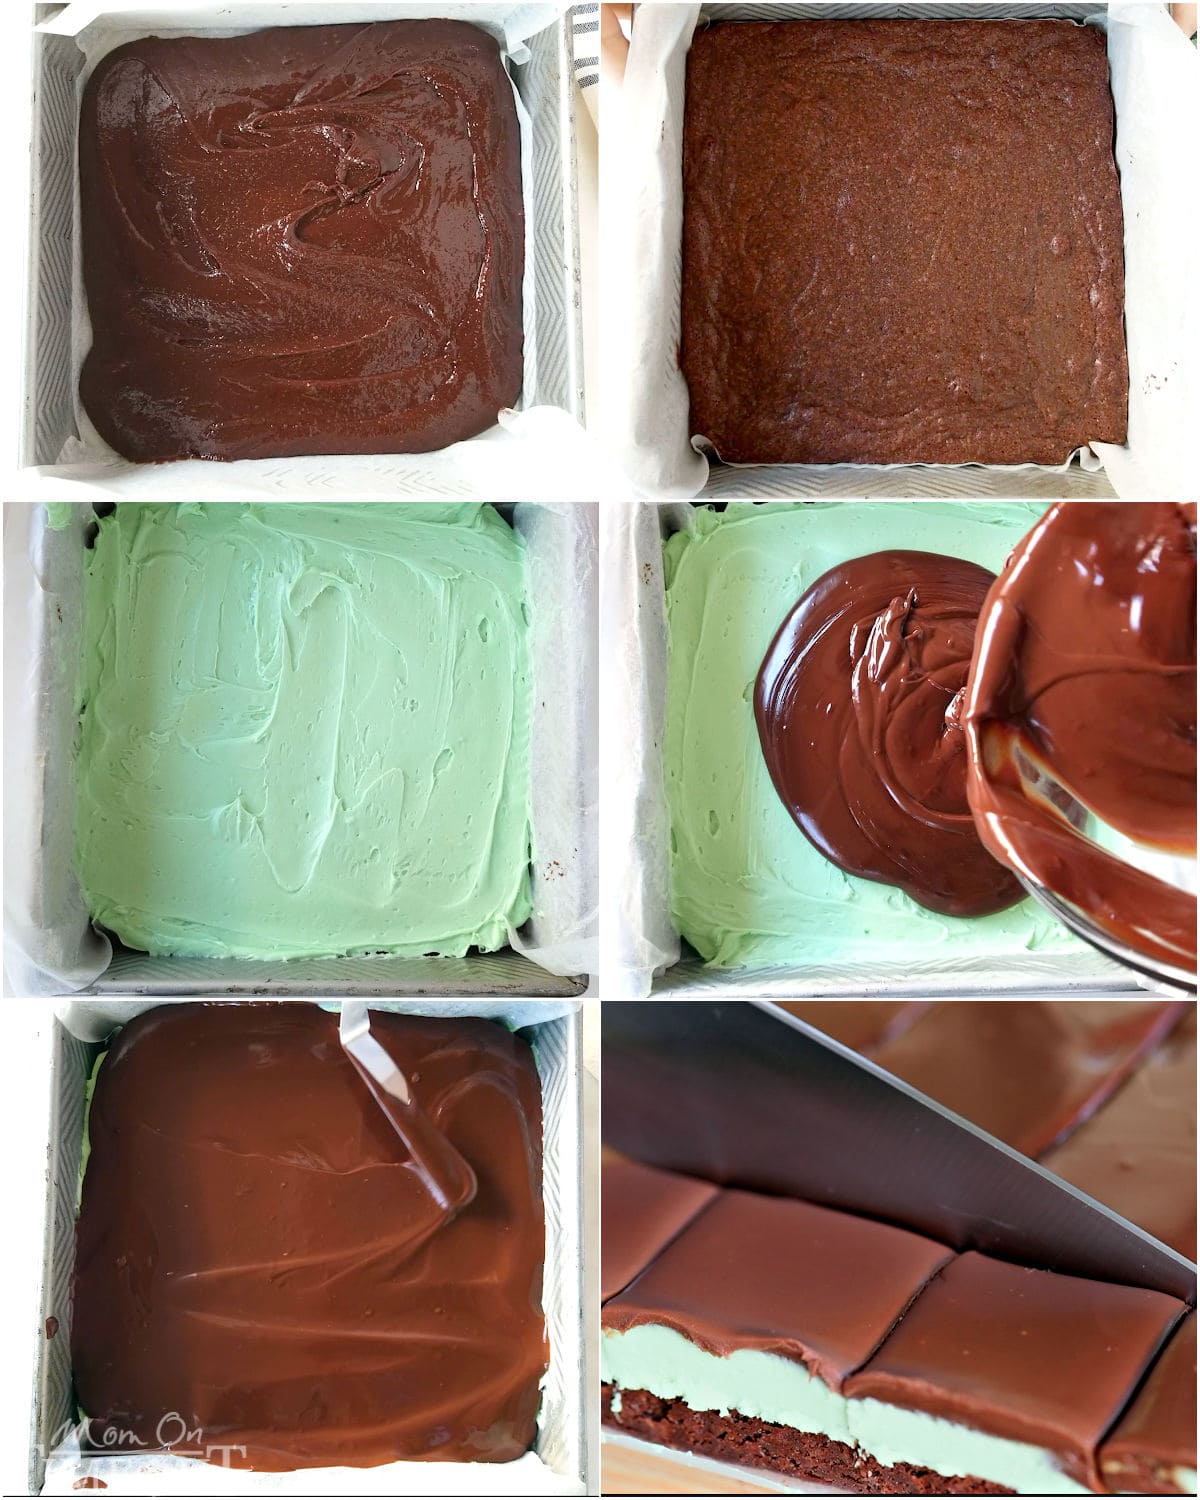 six image collage showing an overview of how to make chocolate mint brownies.